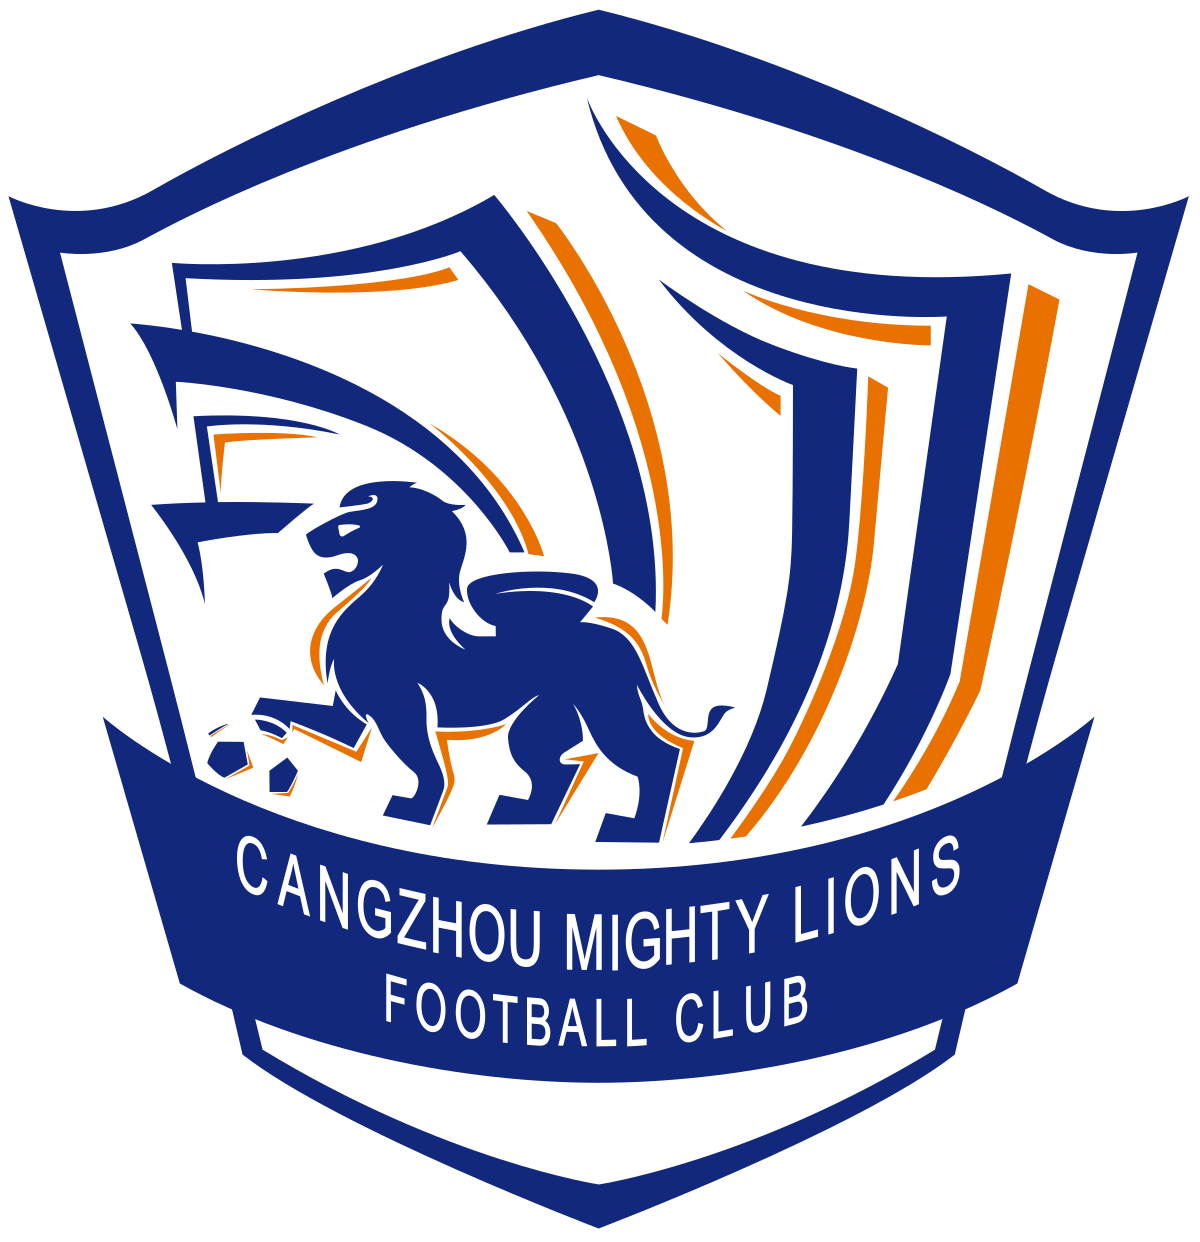 Wappen ehemals Cangzhou Mighty Lions FC  13556